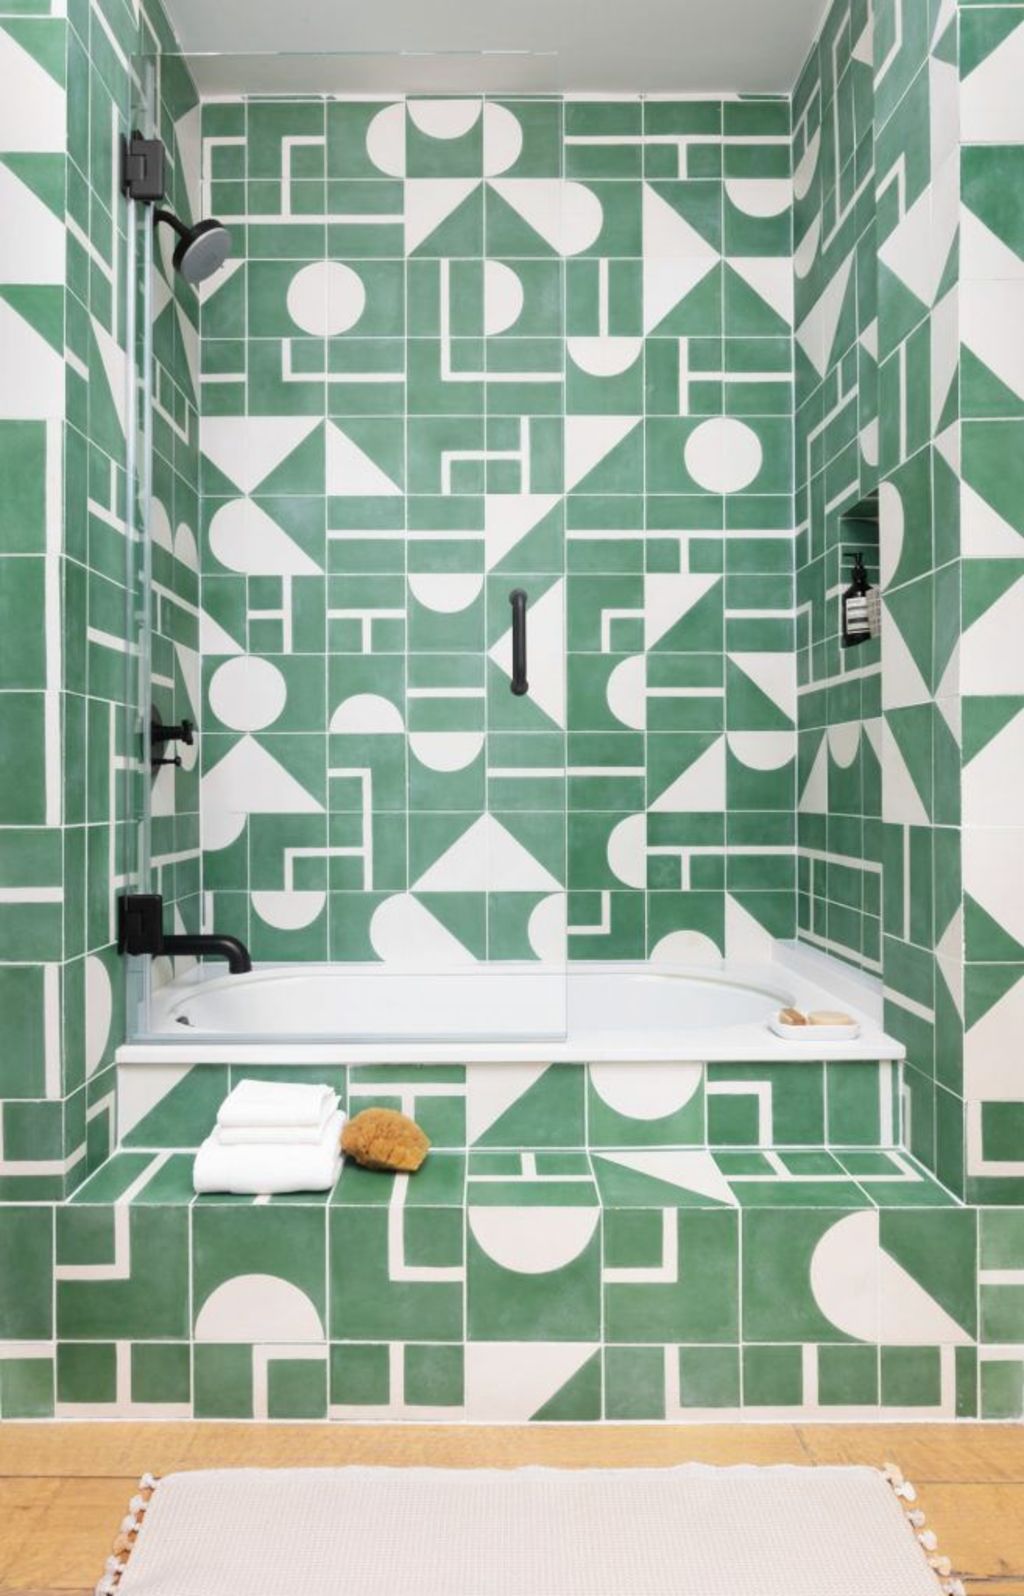 Have Fun with Shower Tiles